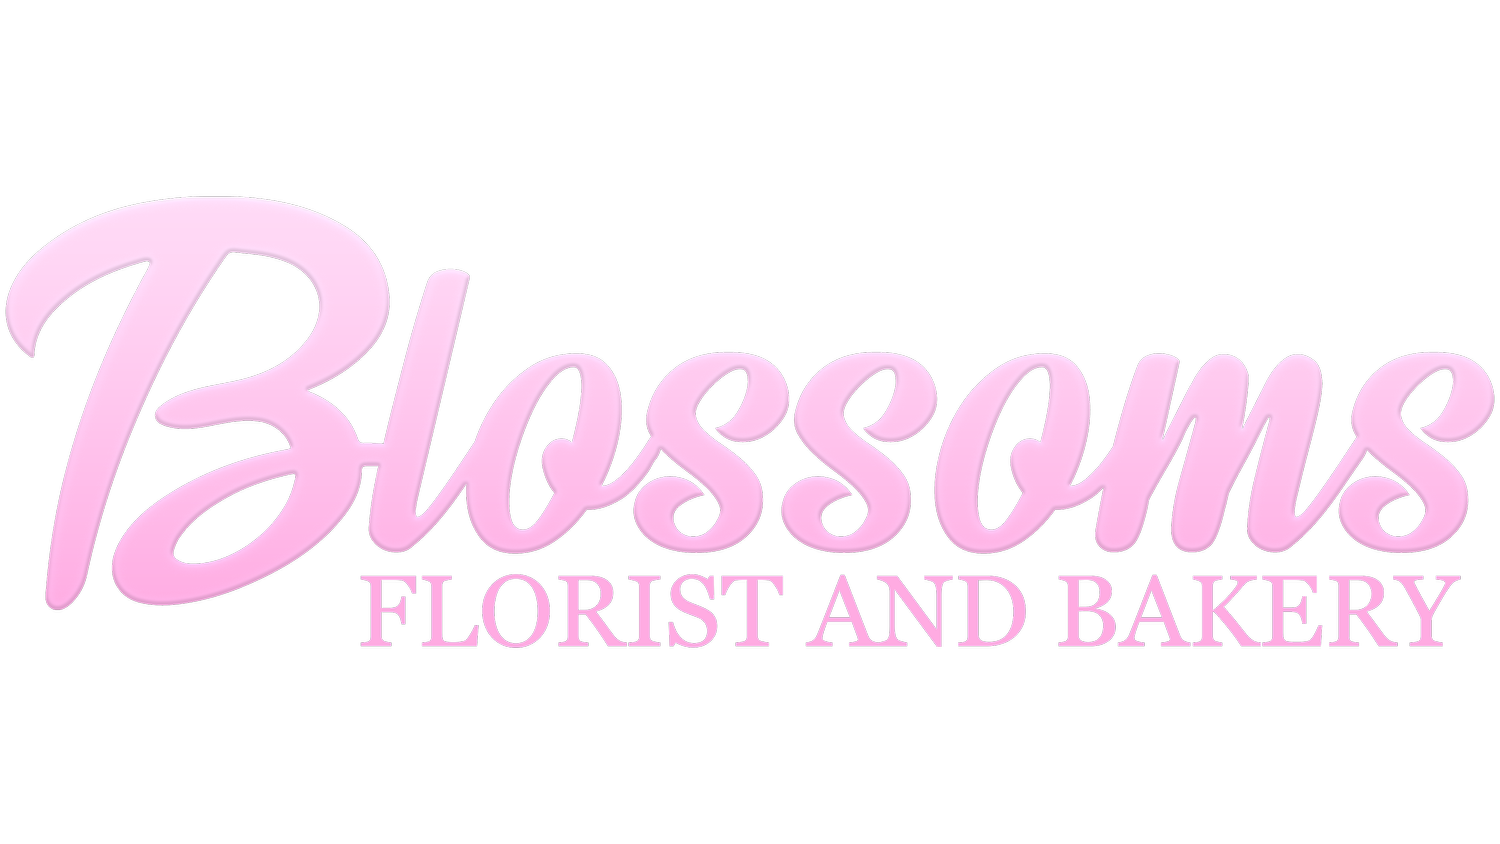 Blossoms Florist and Bakery